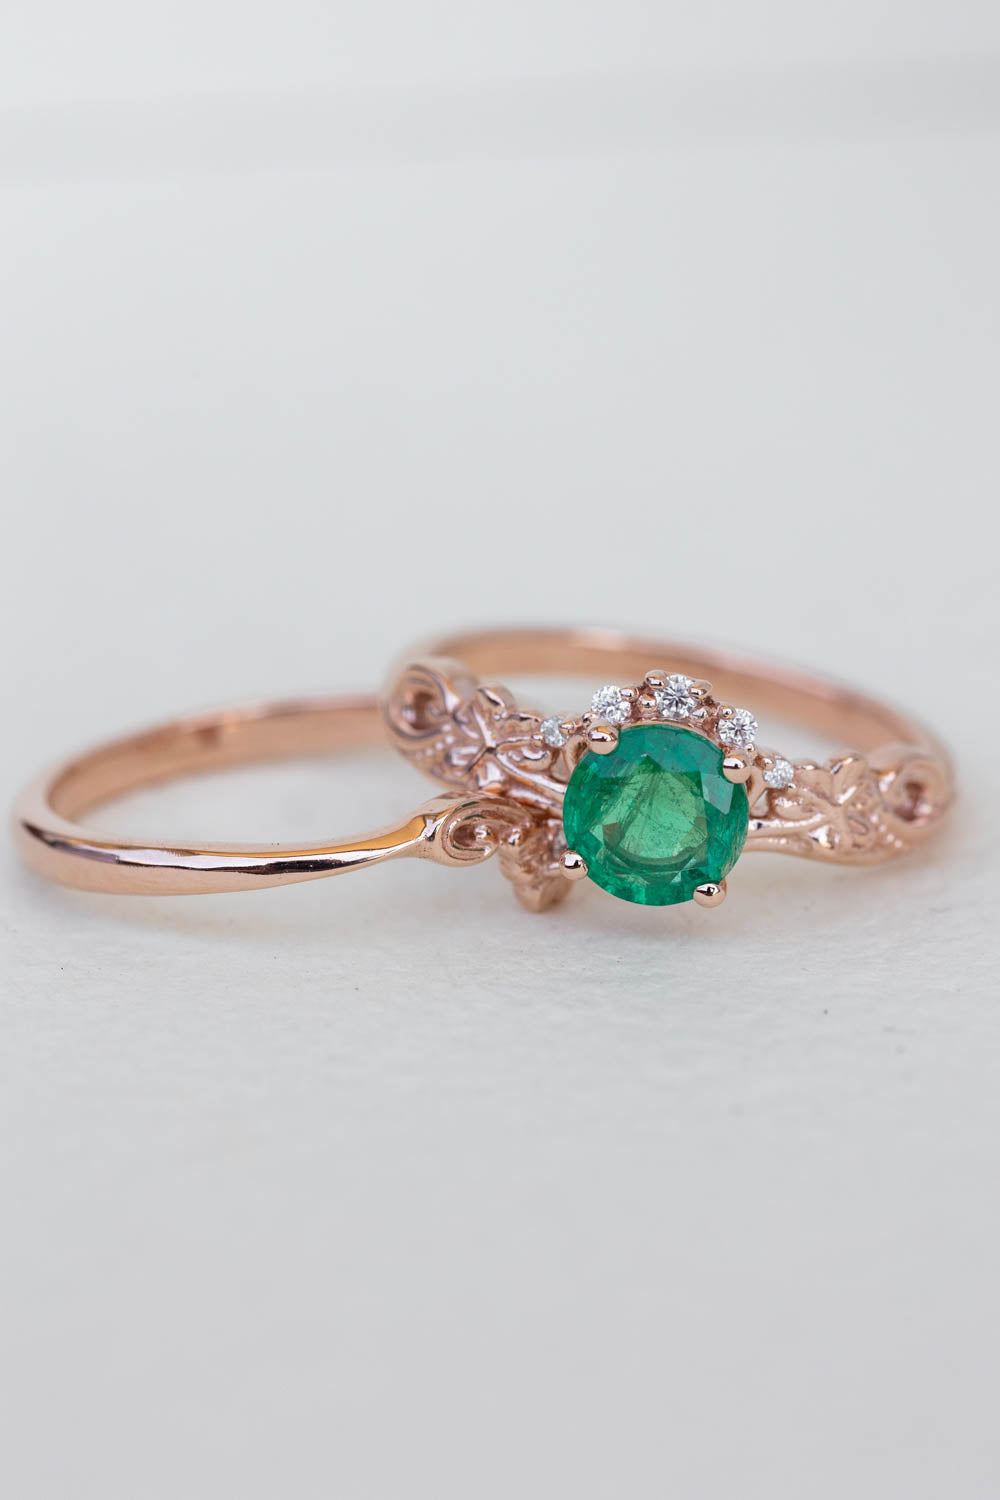 Round emerald rose gold engagement ring, clover leaves proposal ring with diamonds / Horta - Eden Garden Jewelry™